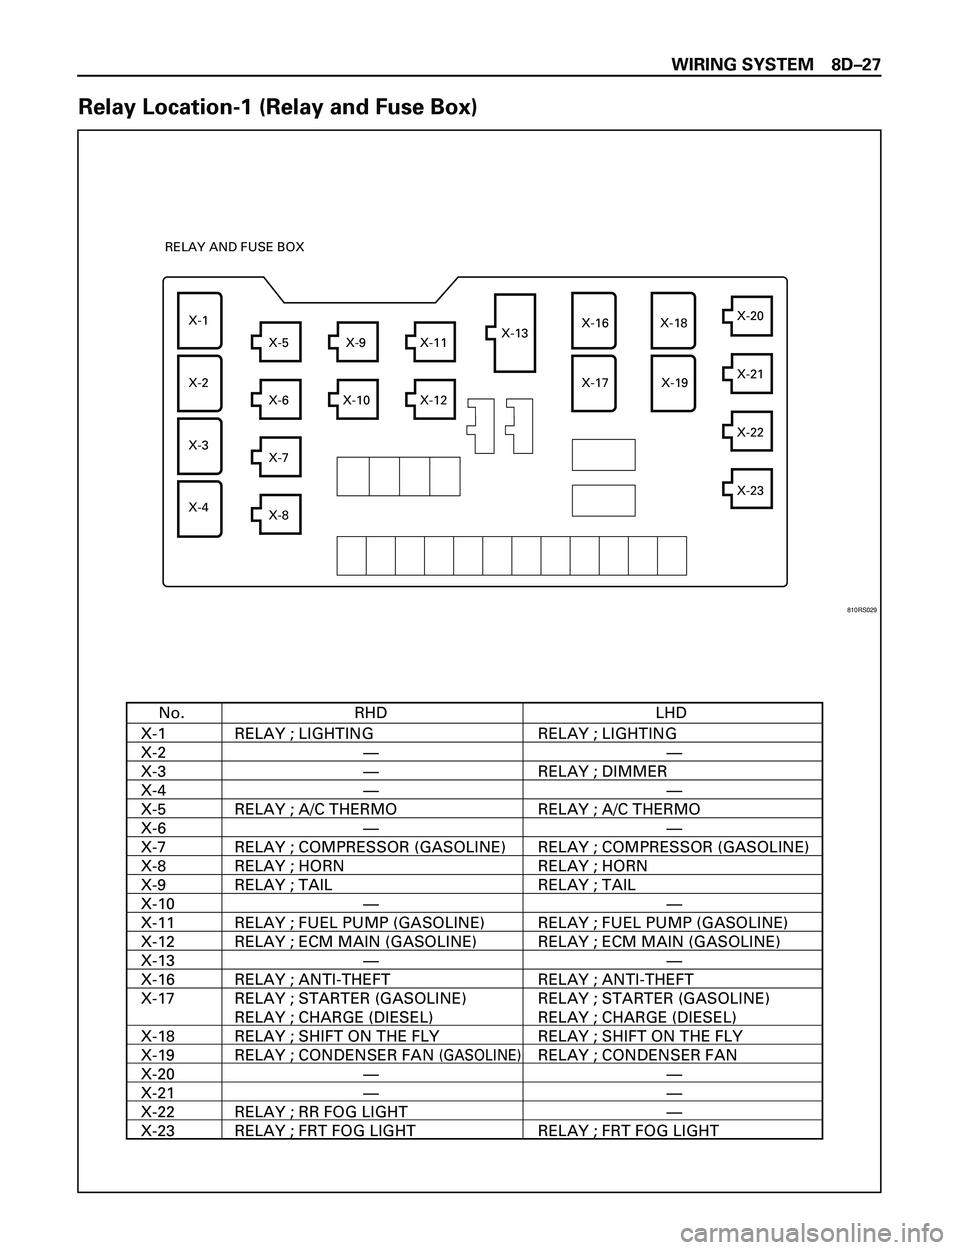 ISUZU TROOPER 1998  Service Repair Manual WIRING SYSTEM 8DÐ27
Relay Location-1 (Relay and Fuse Box)
RHDNo.
X-1
X-2
X-3
X-4
X-5
X-6
X-7
X-8
X-9
X-10
X-11
X-12
X-13
X-16
X-17
X-18
X-19
X-20
X-21
X-22
X-23LHD
RELAY ; LIGHTING
RELAY ; A/C THERMO